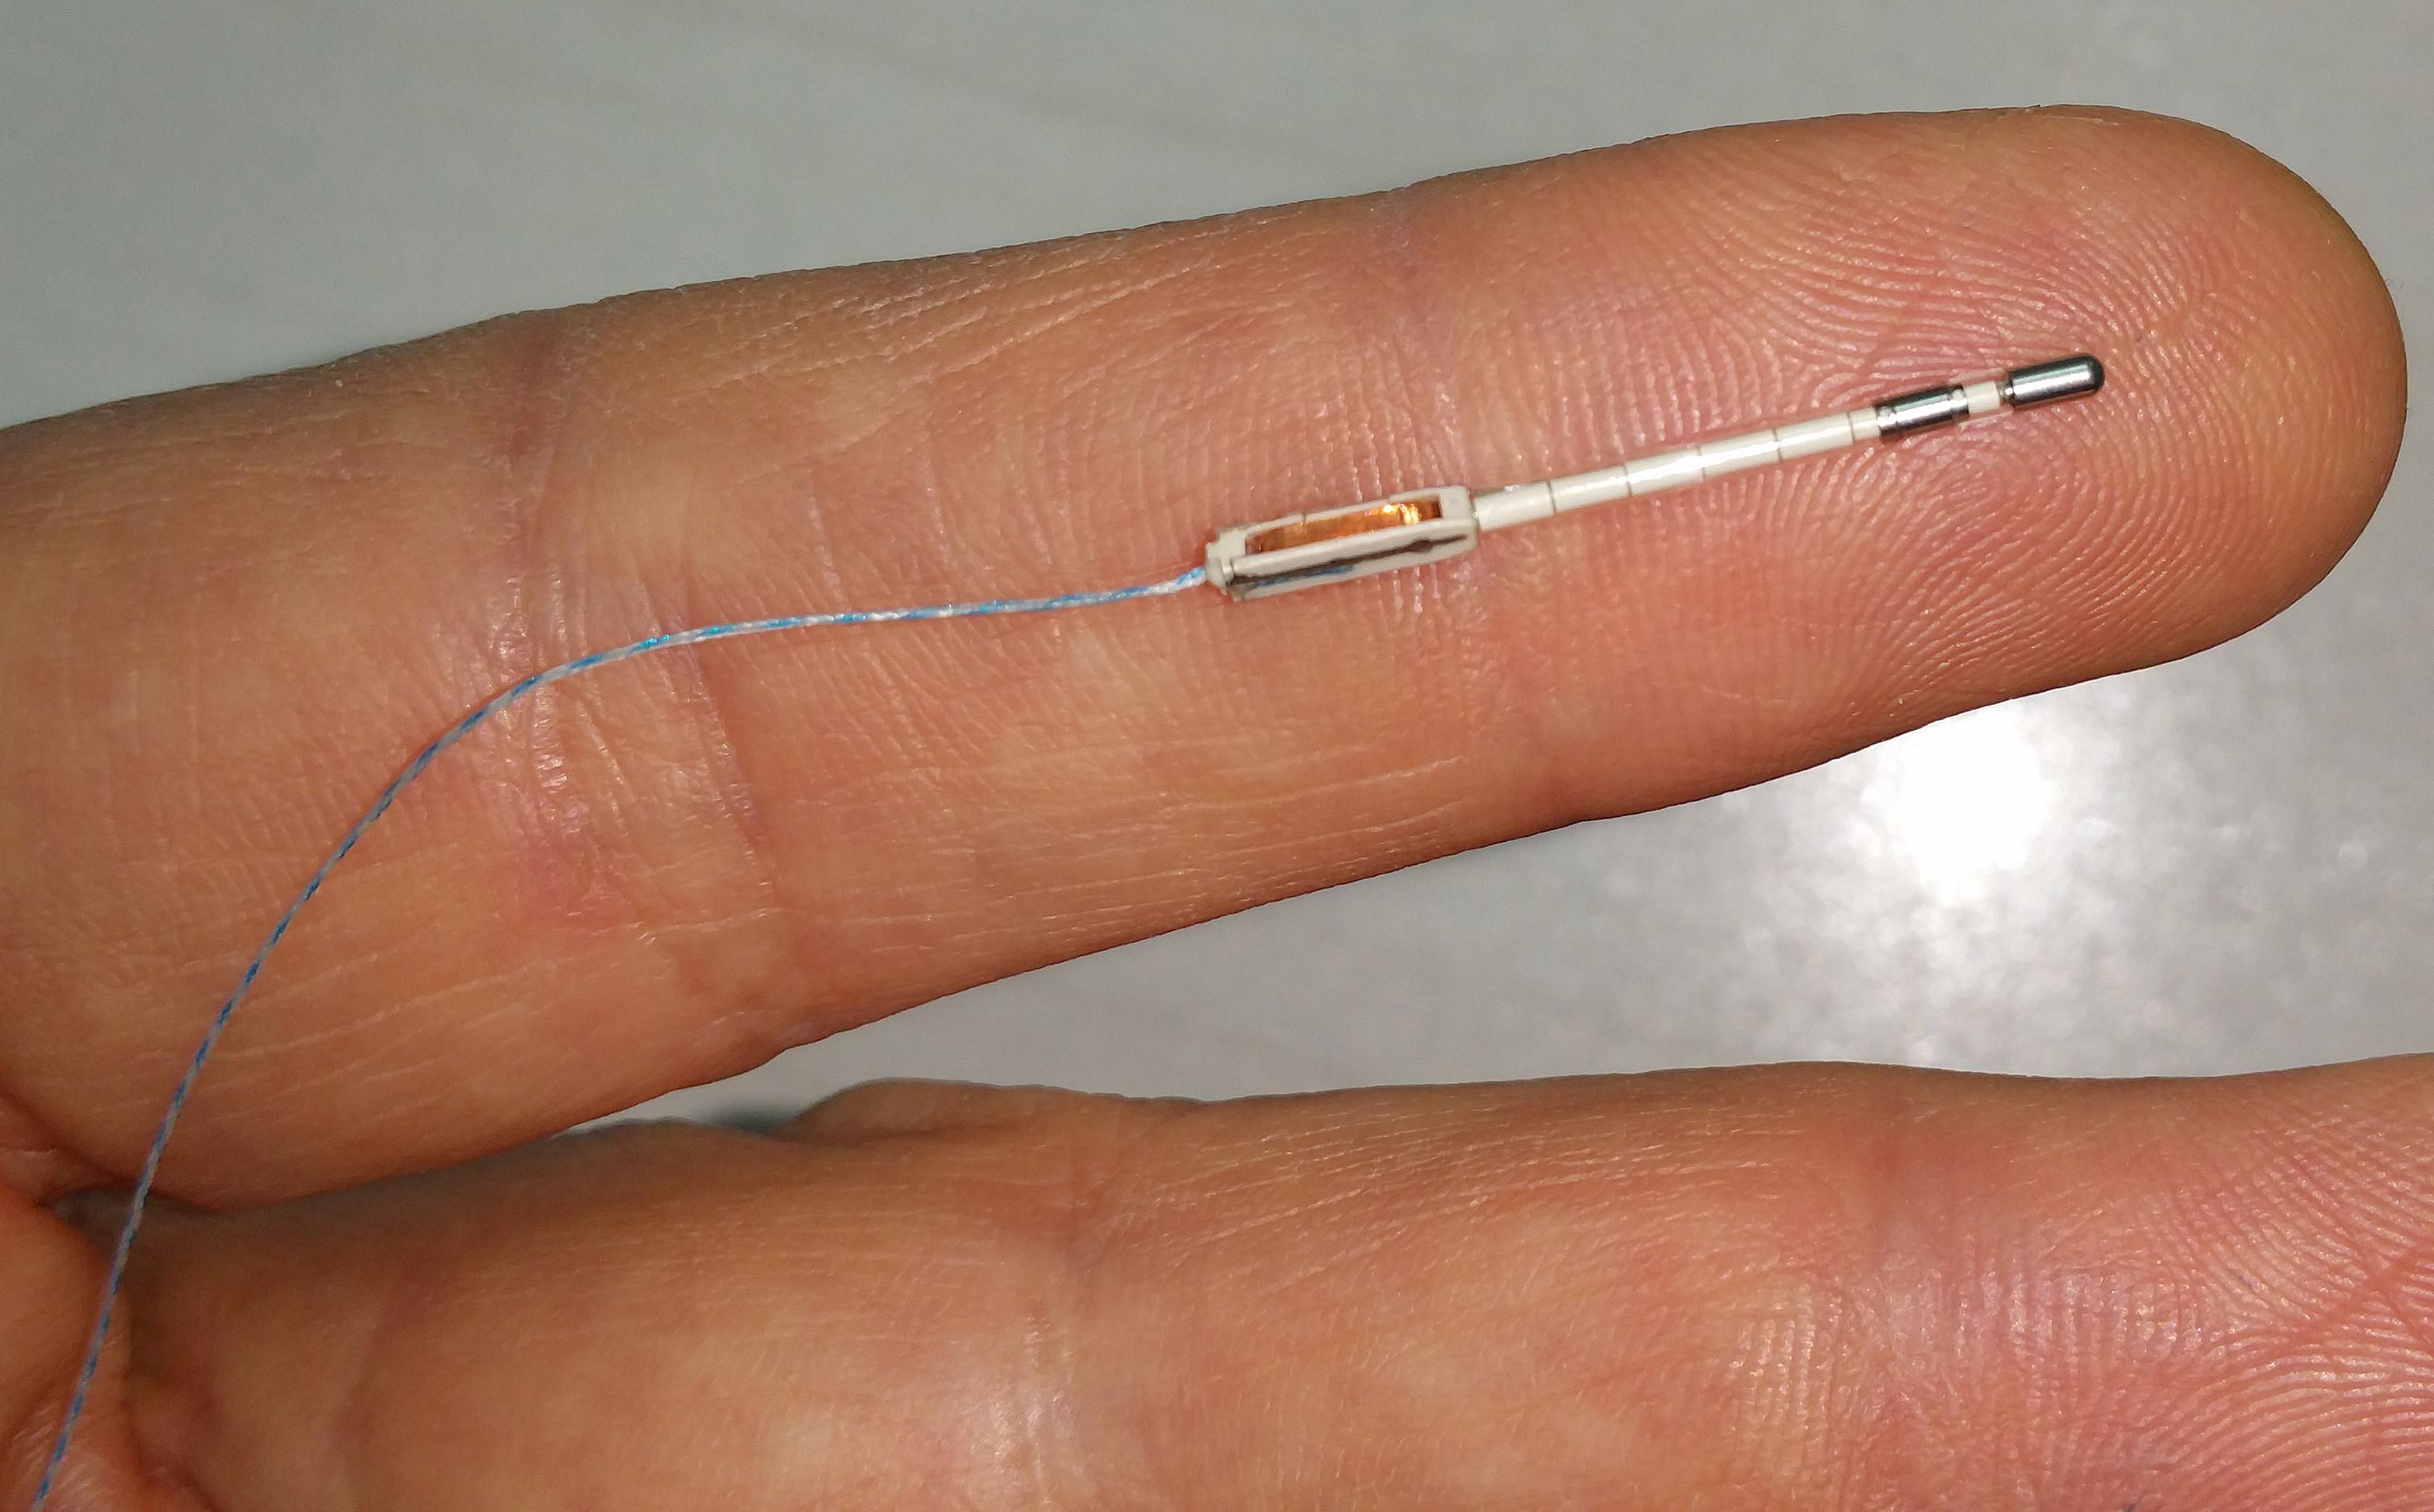 A small thin device with a metal cap on one end and a thin wire on the other sits in the middle of a finger.